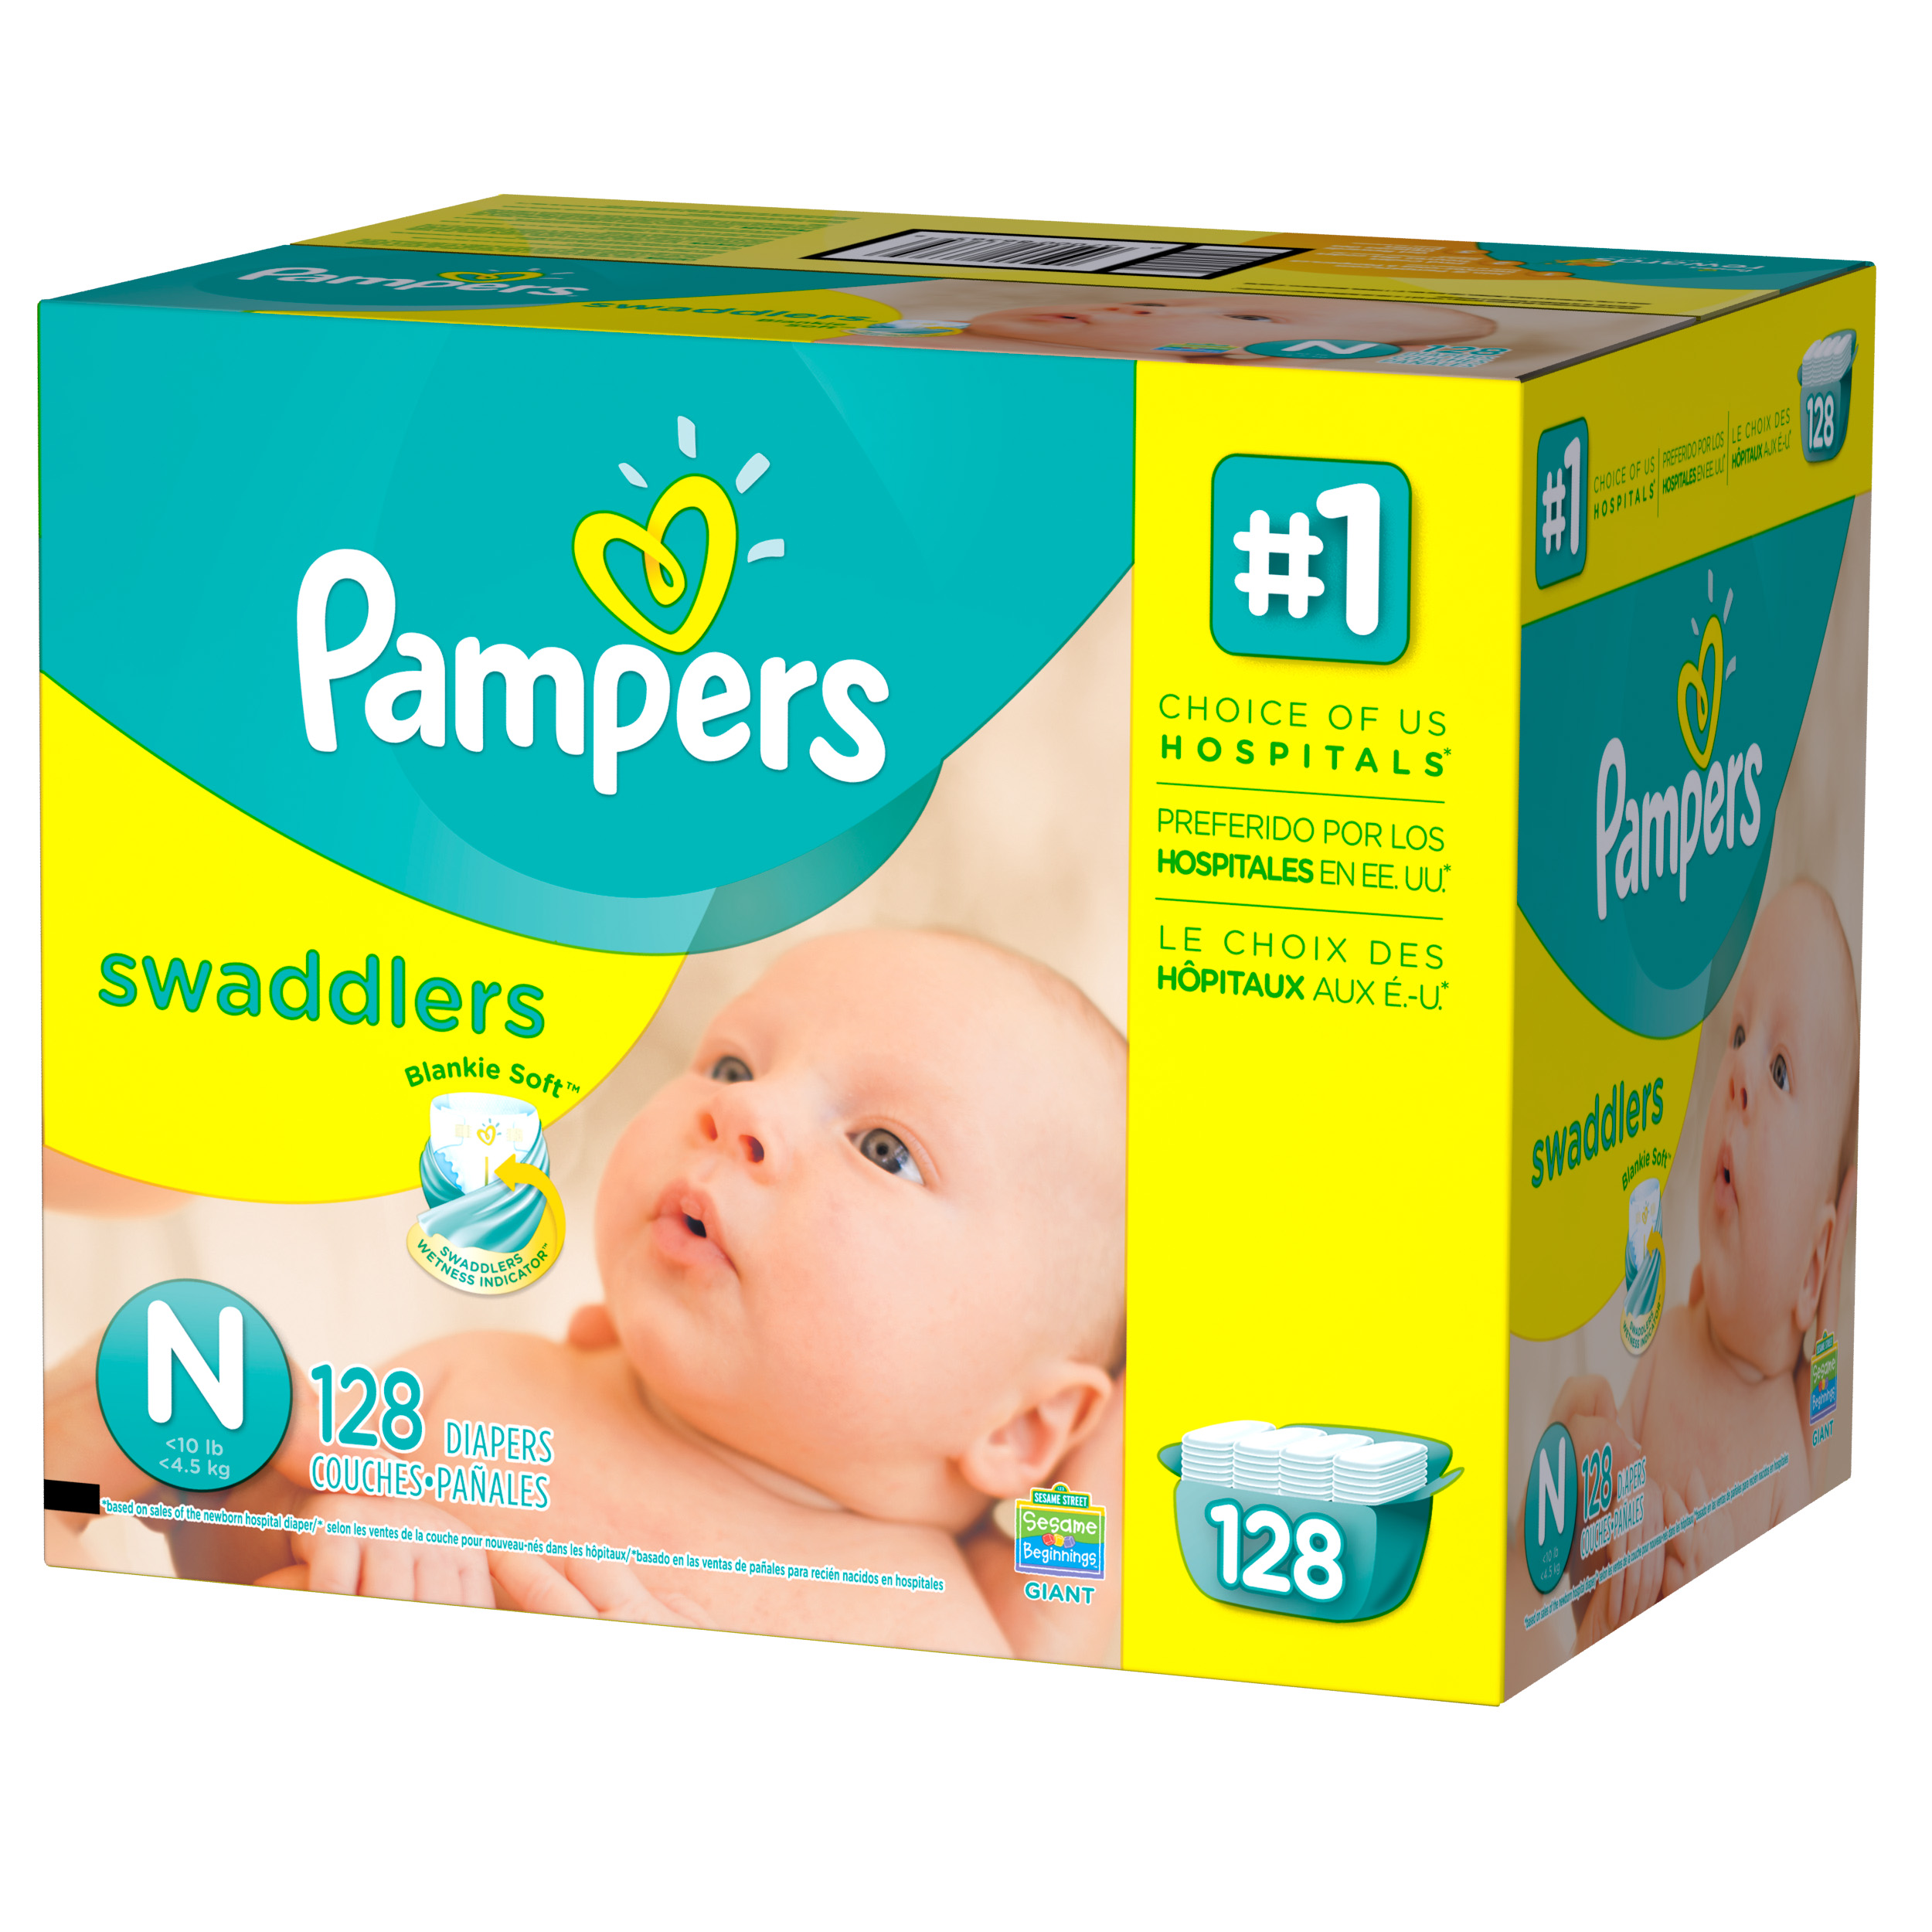 Pampers Swaddlers Newborn Diapers Size 0 128 count - image 1 of 10